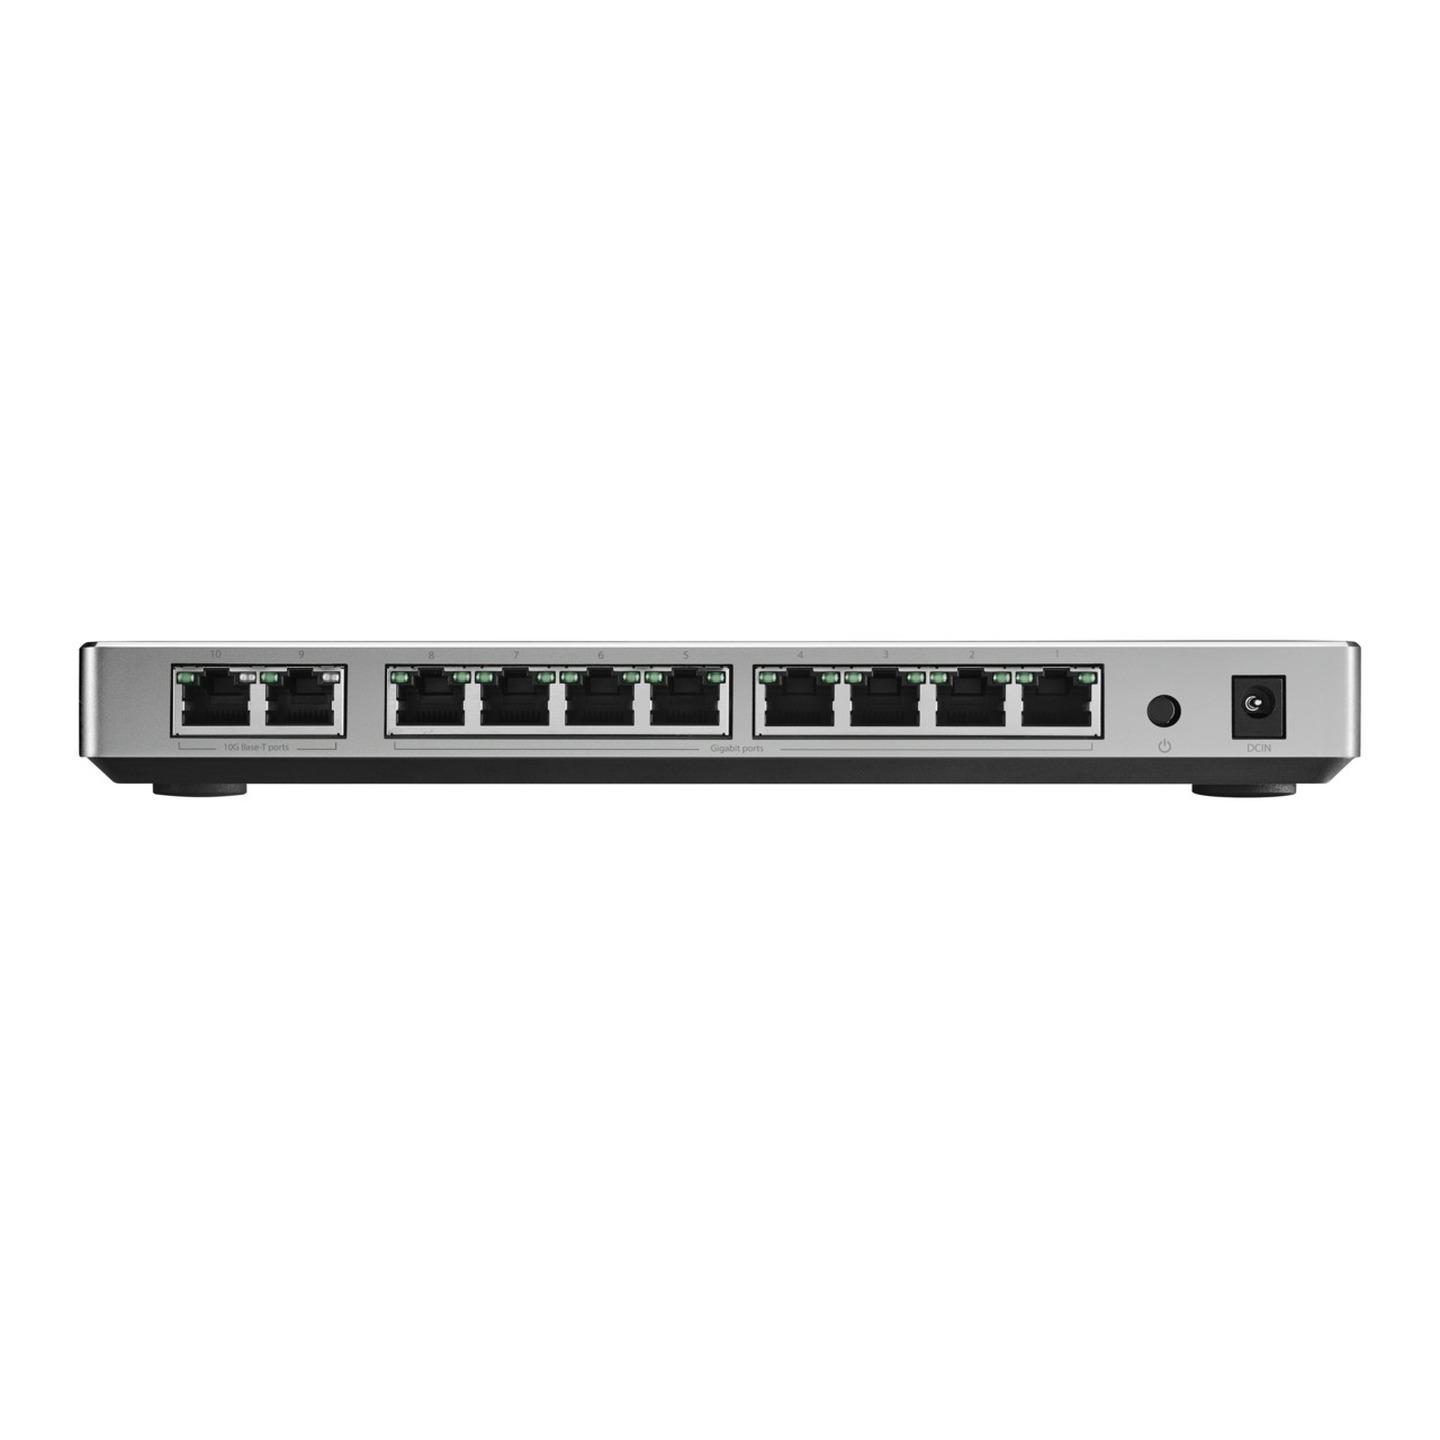 ASUS XG-U2008 10 Port Ethernet Switch with Two 10Gbps Ports